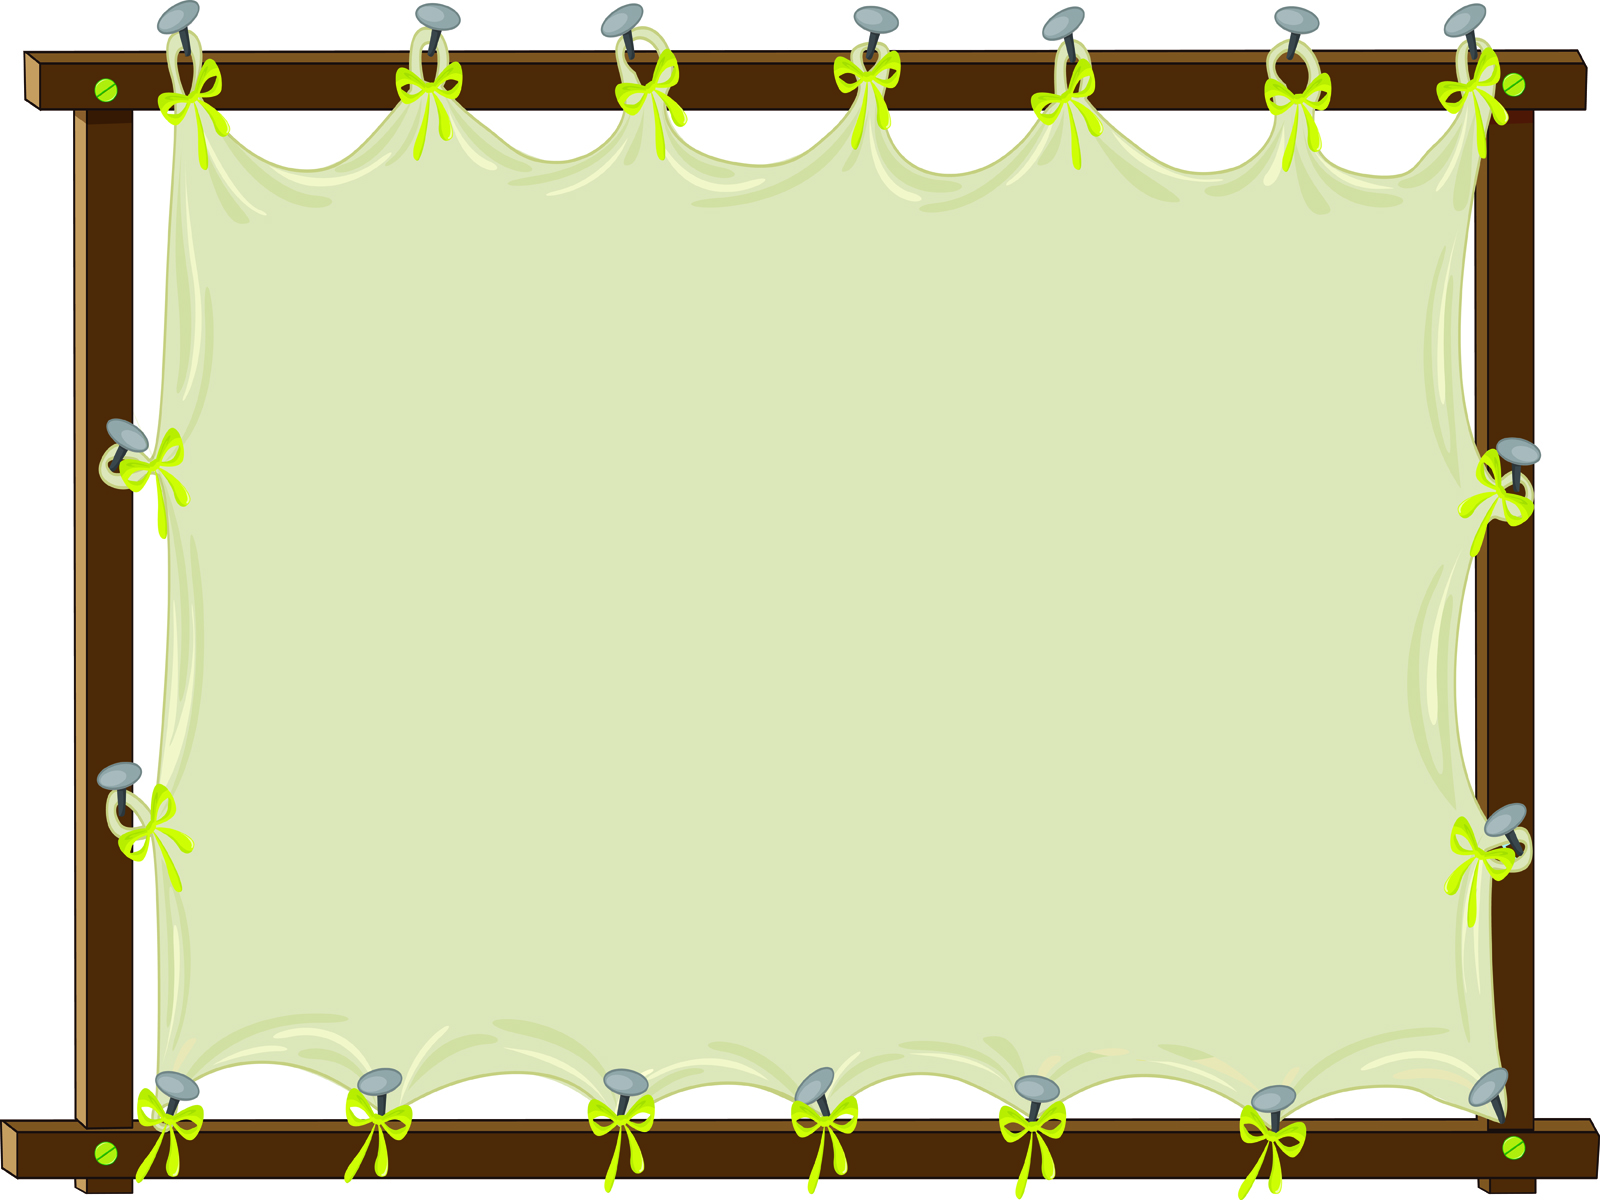 Image of School Clipart Backgrounds #8652, Education Theme Borders ...